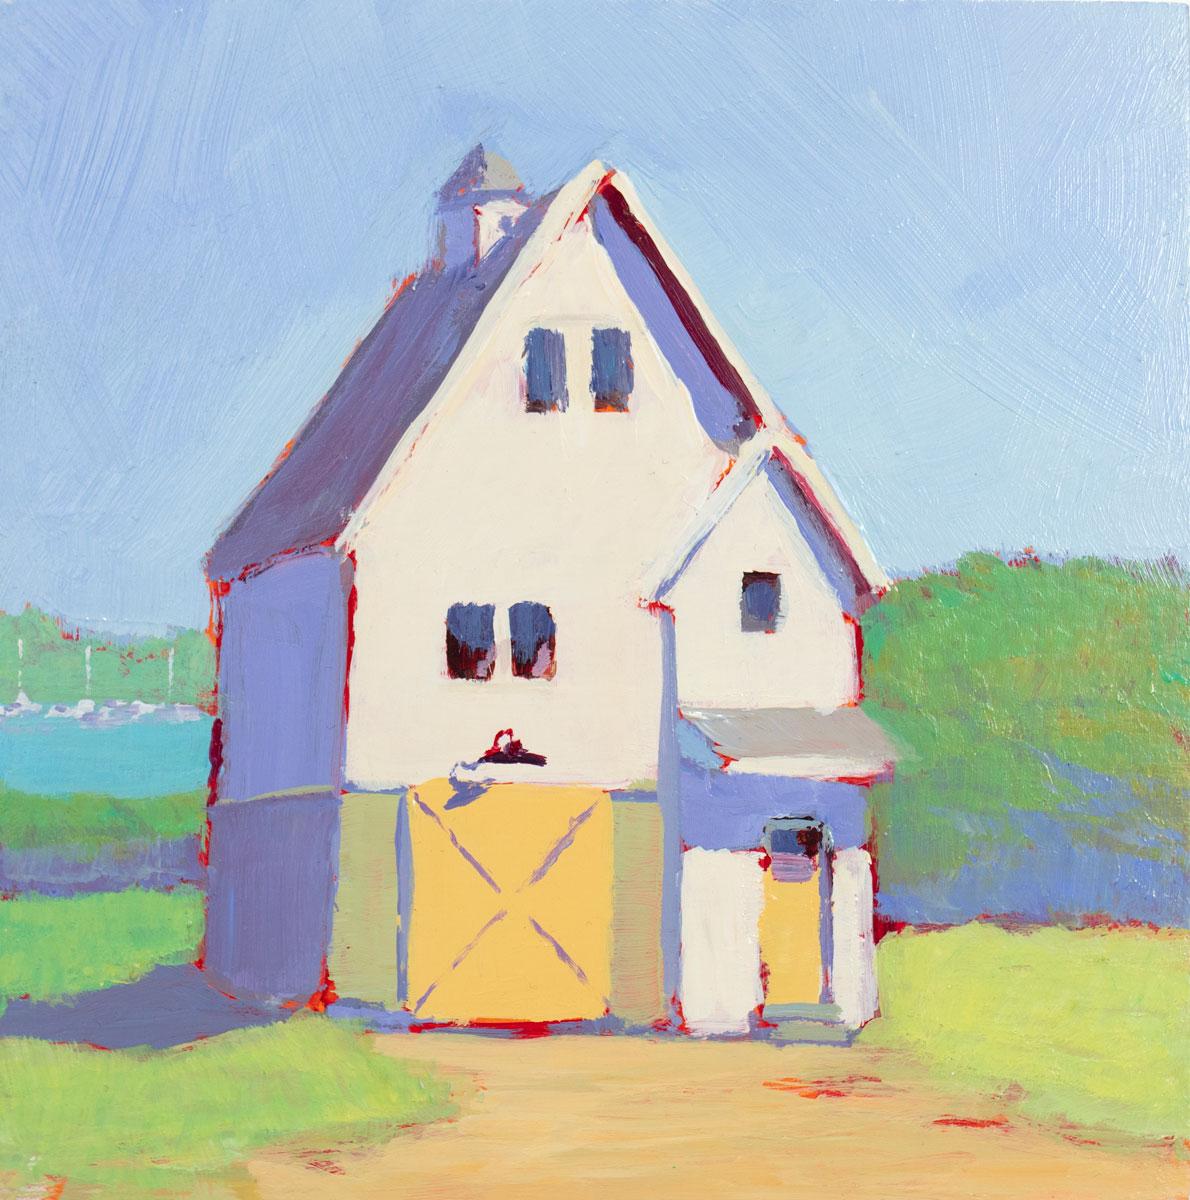 This small contemporary landscape painting by Carol Young features a colorful palette and captures a white and yellow house which casts cool purple shadows onto vibrant green grass beneath a pale blue sky. The painting is signed by the artist on the